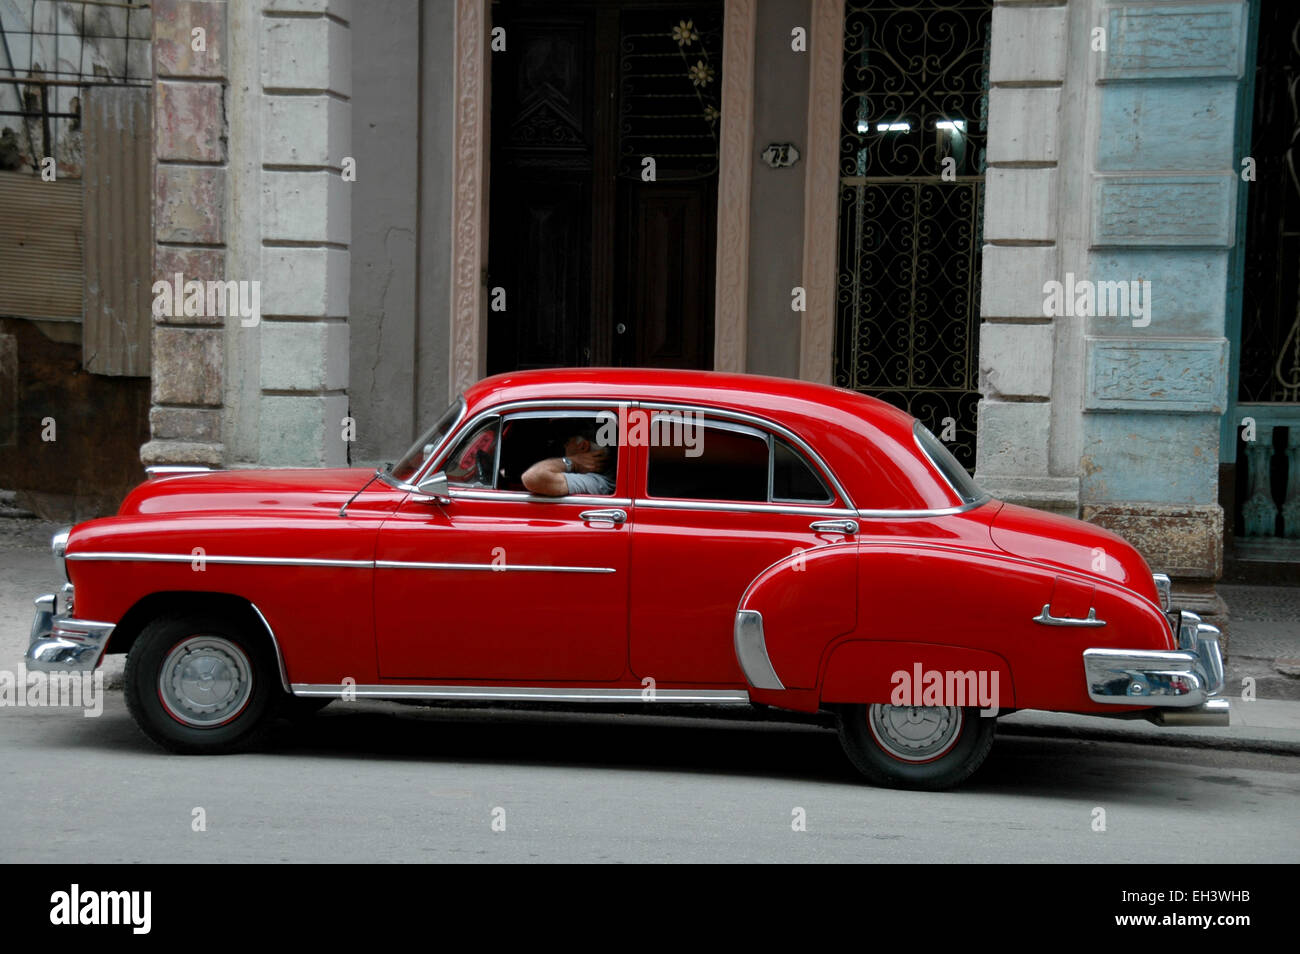 A bright red old American Buick car in Havana, Cuba Stock Photo